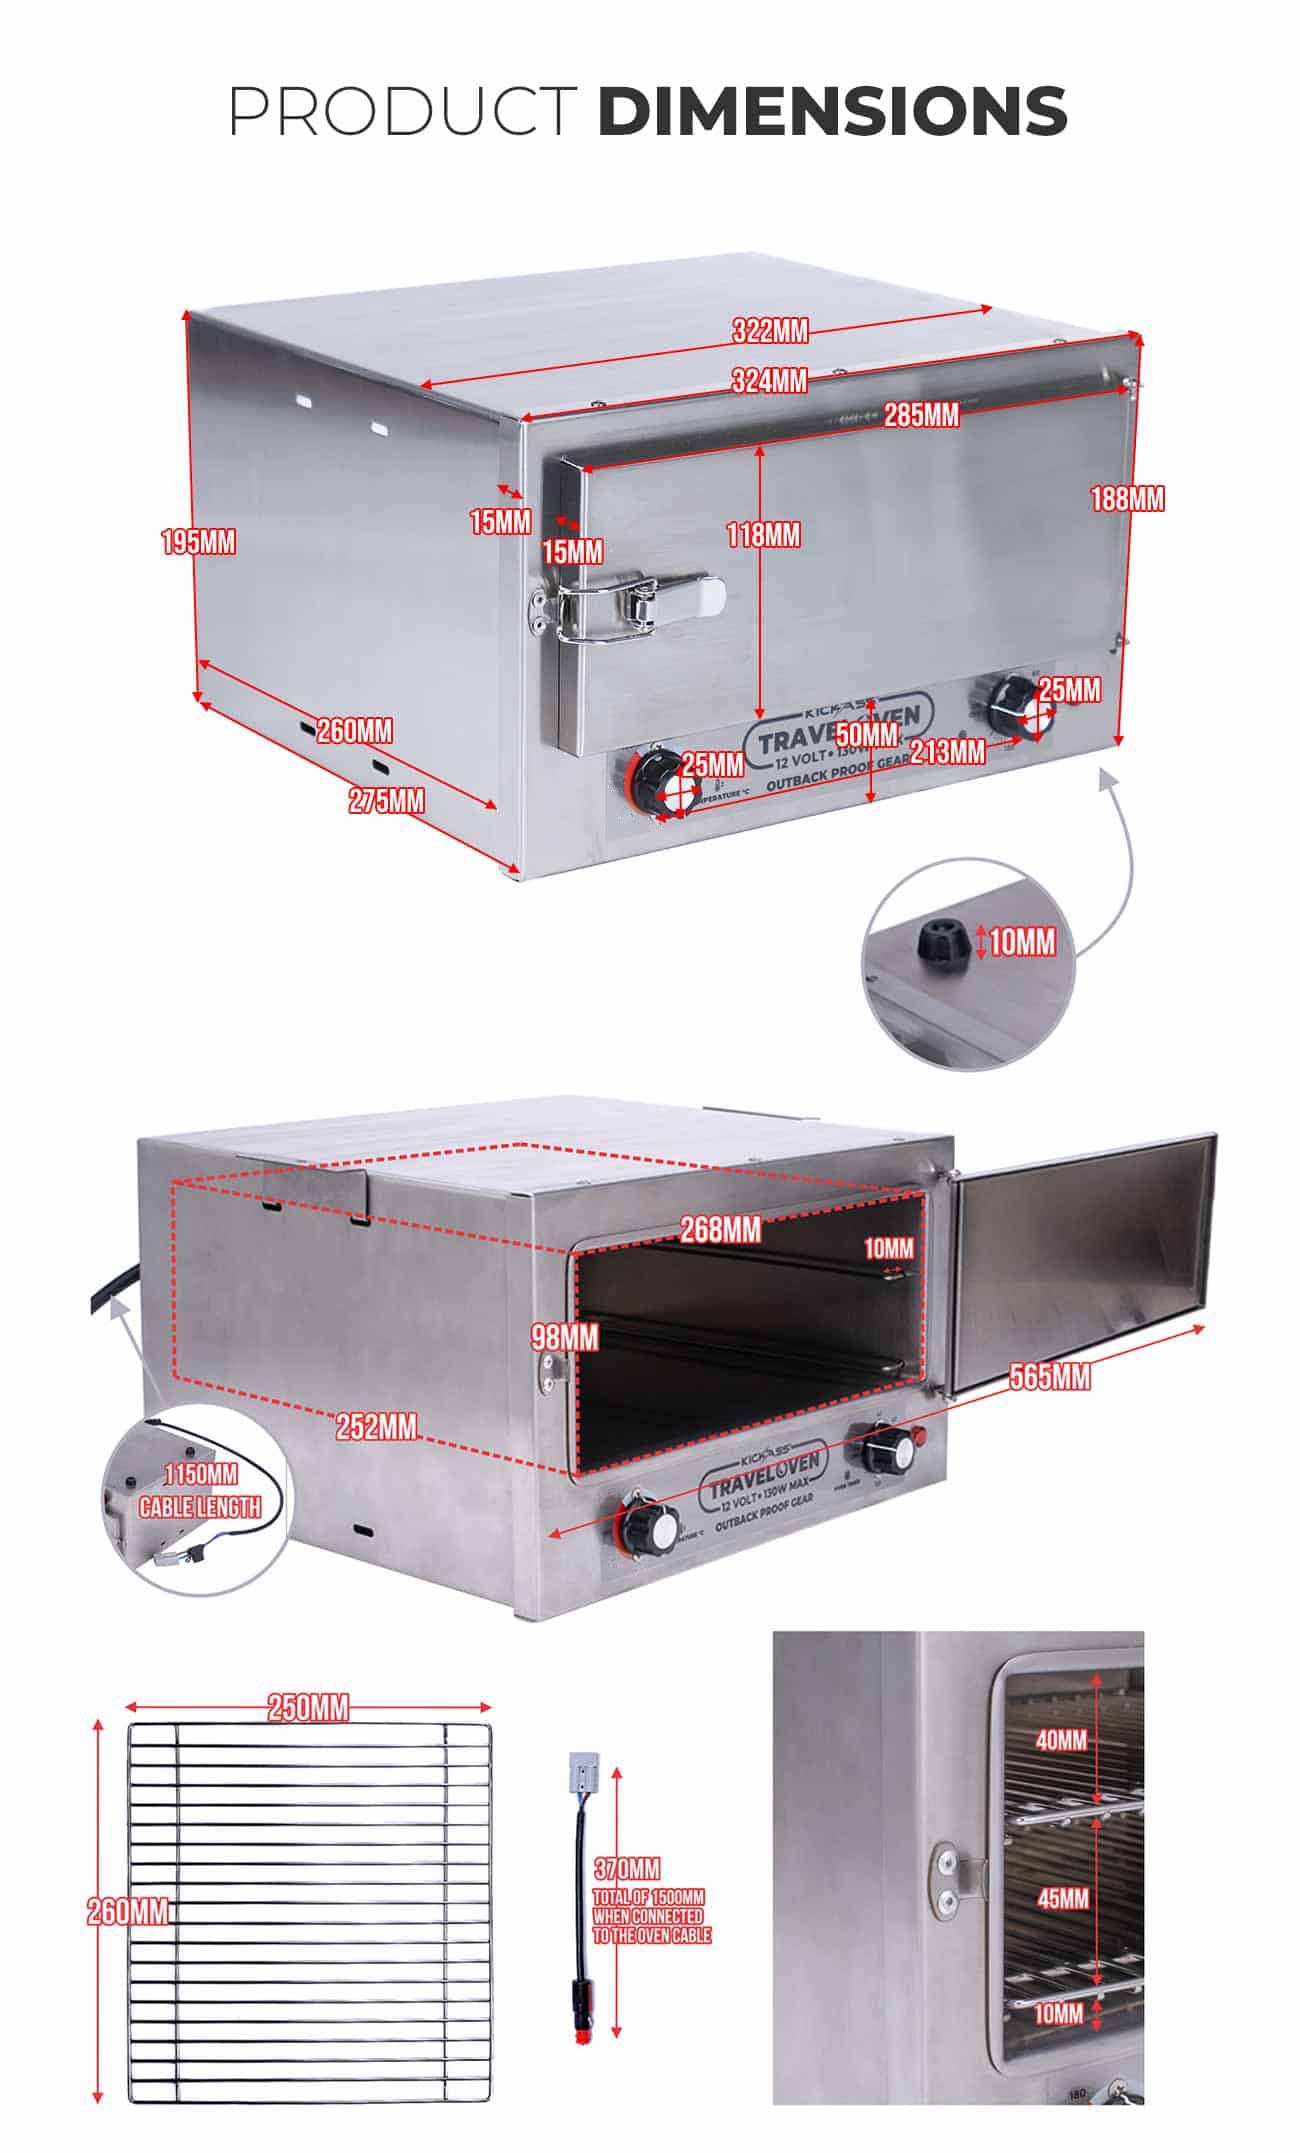 KickAss 12V 130W Portable Travel Oven - Product dimensions